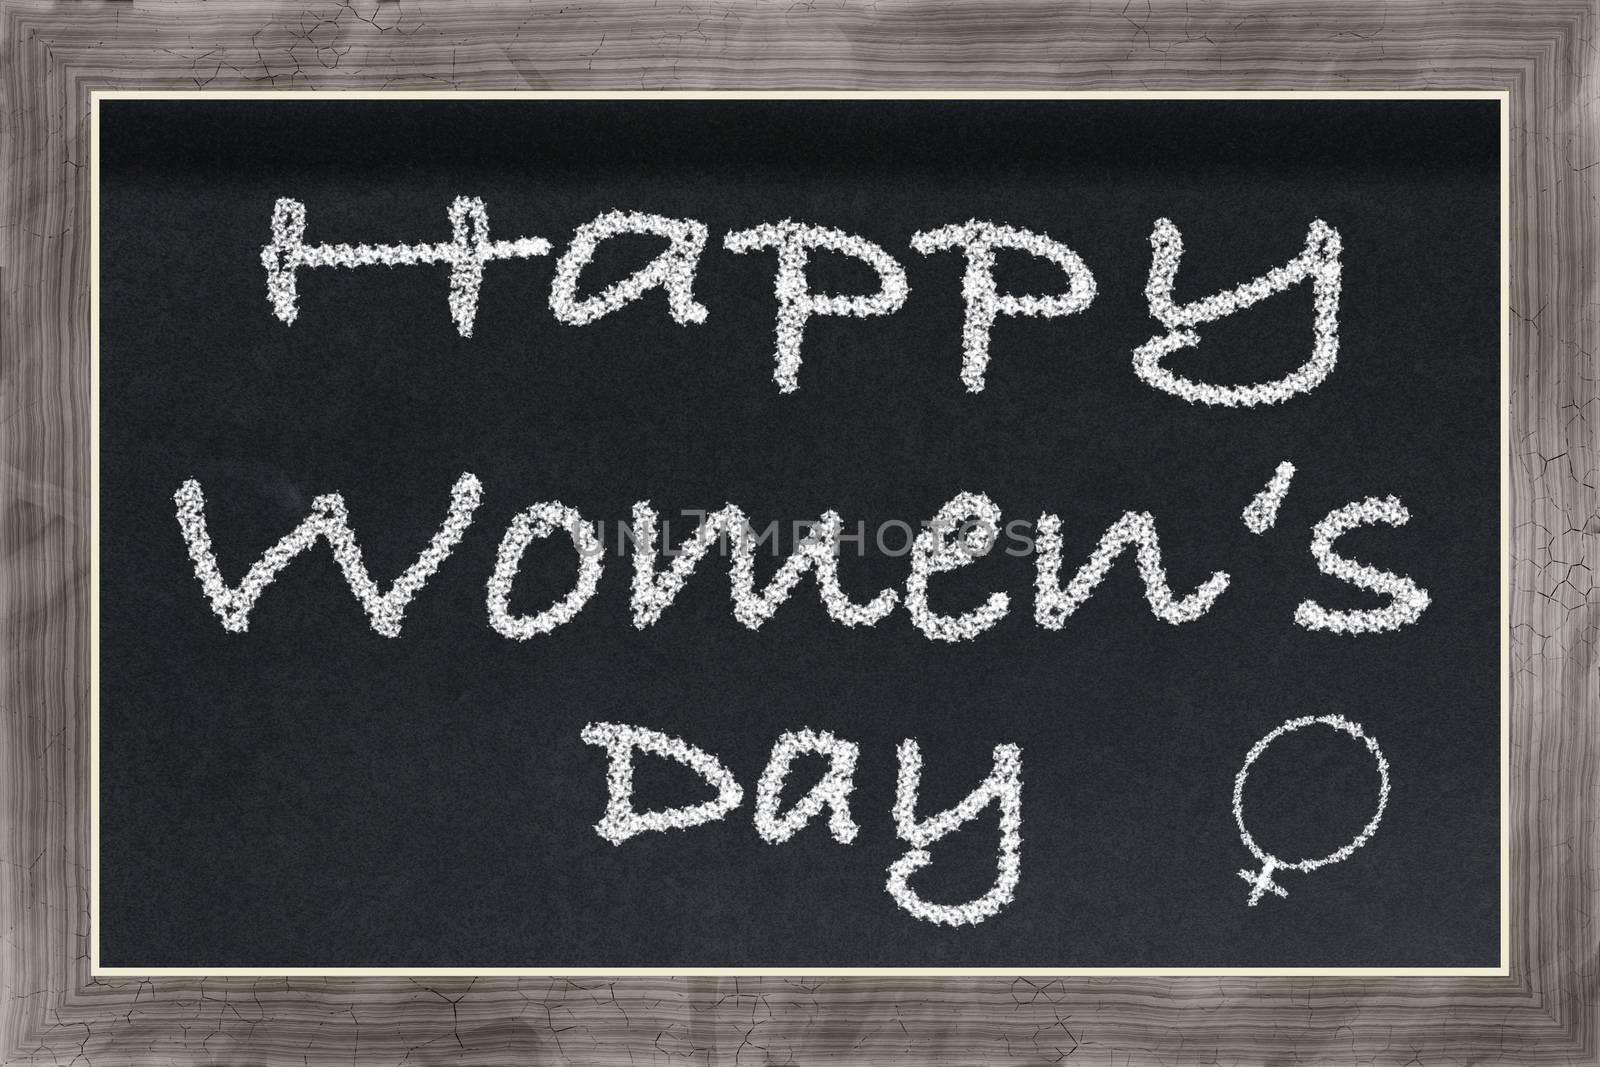 Black Chalkboard with wooden frame and text Happy Women's Day and women's sign